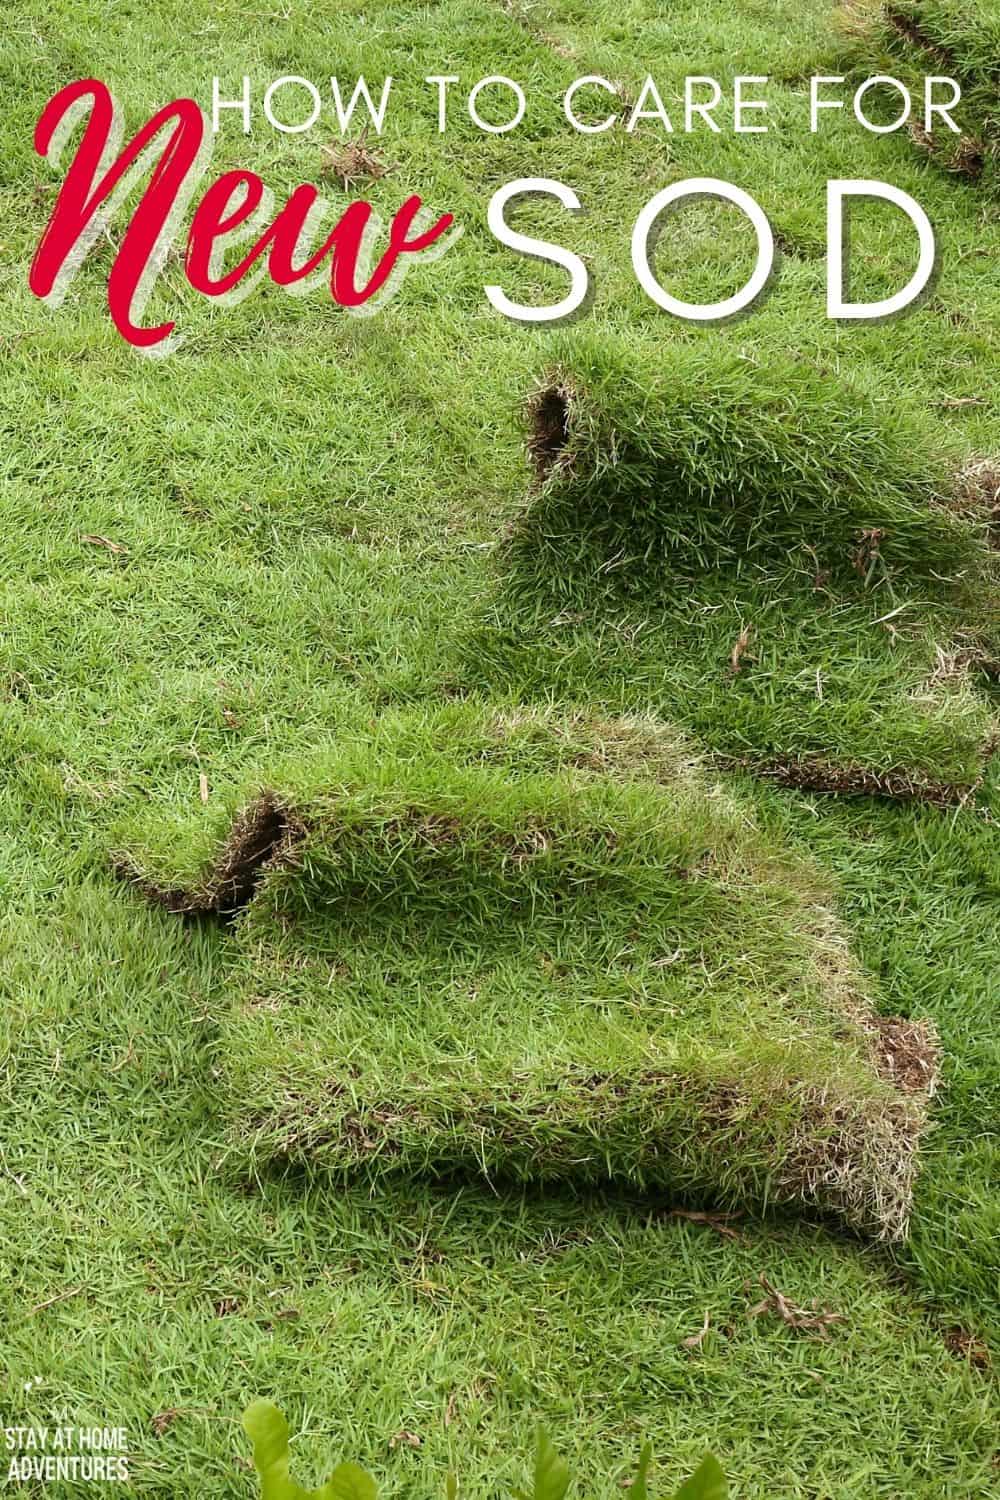 Learn the basics of caring for new sod and answer questions like what type of sod to buy, when it's time to water your lawn, and more. via @mystayathome